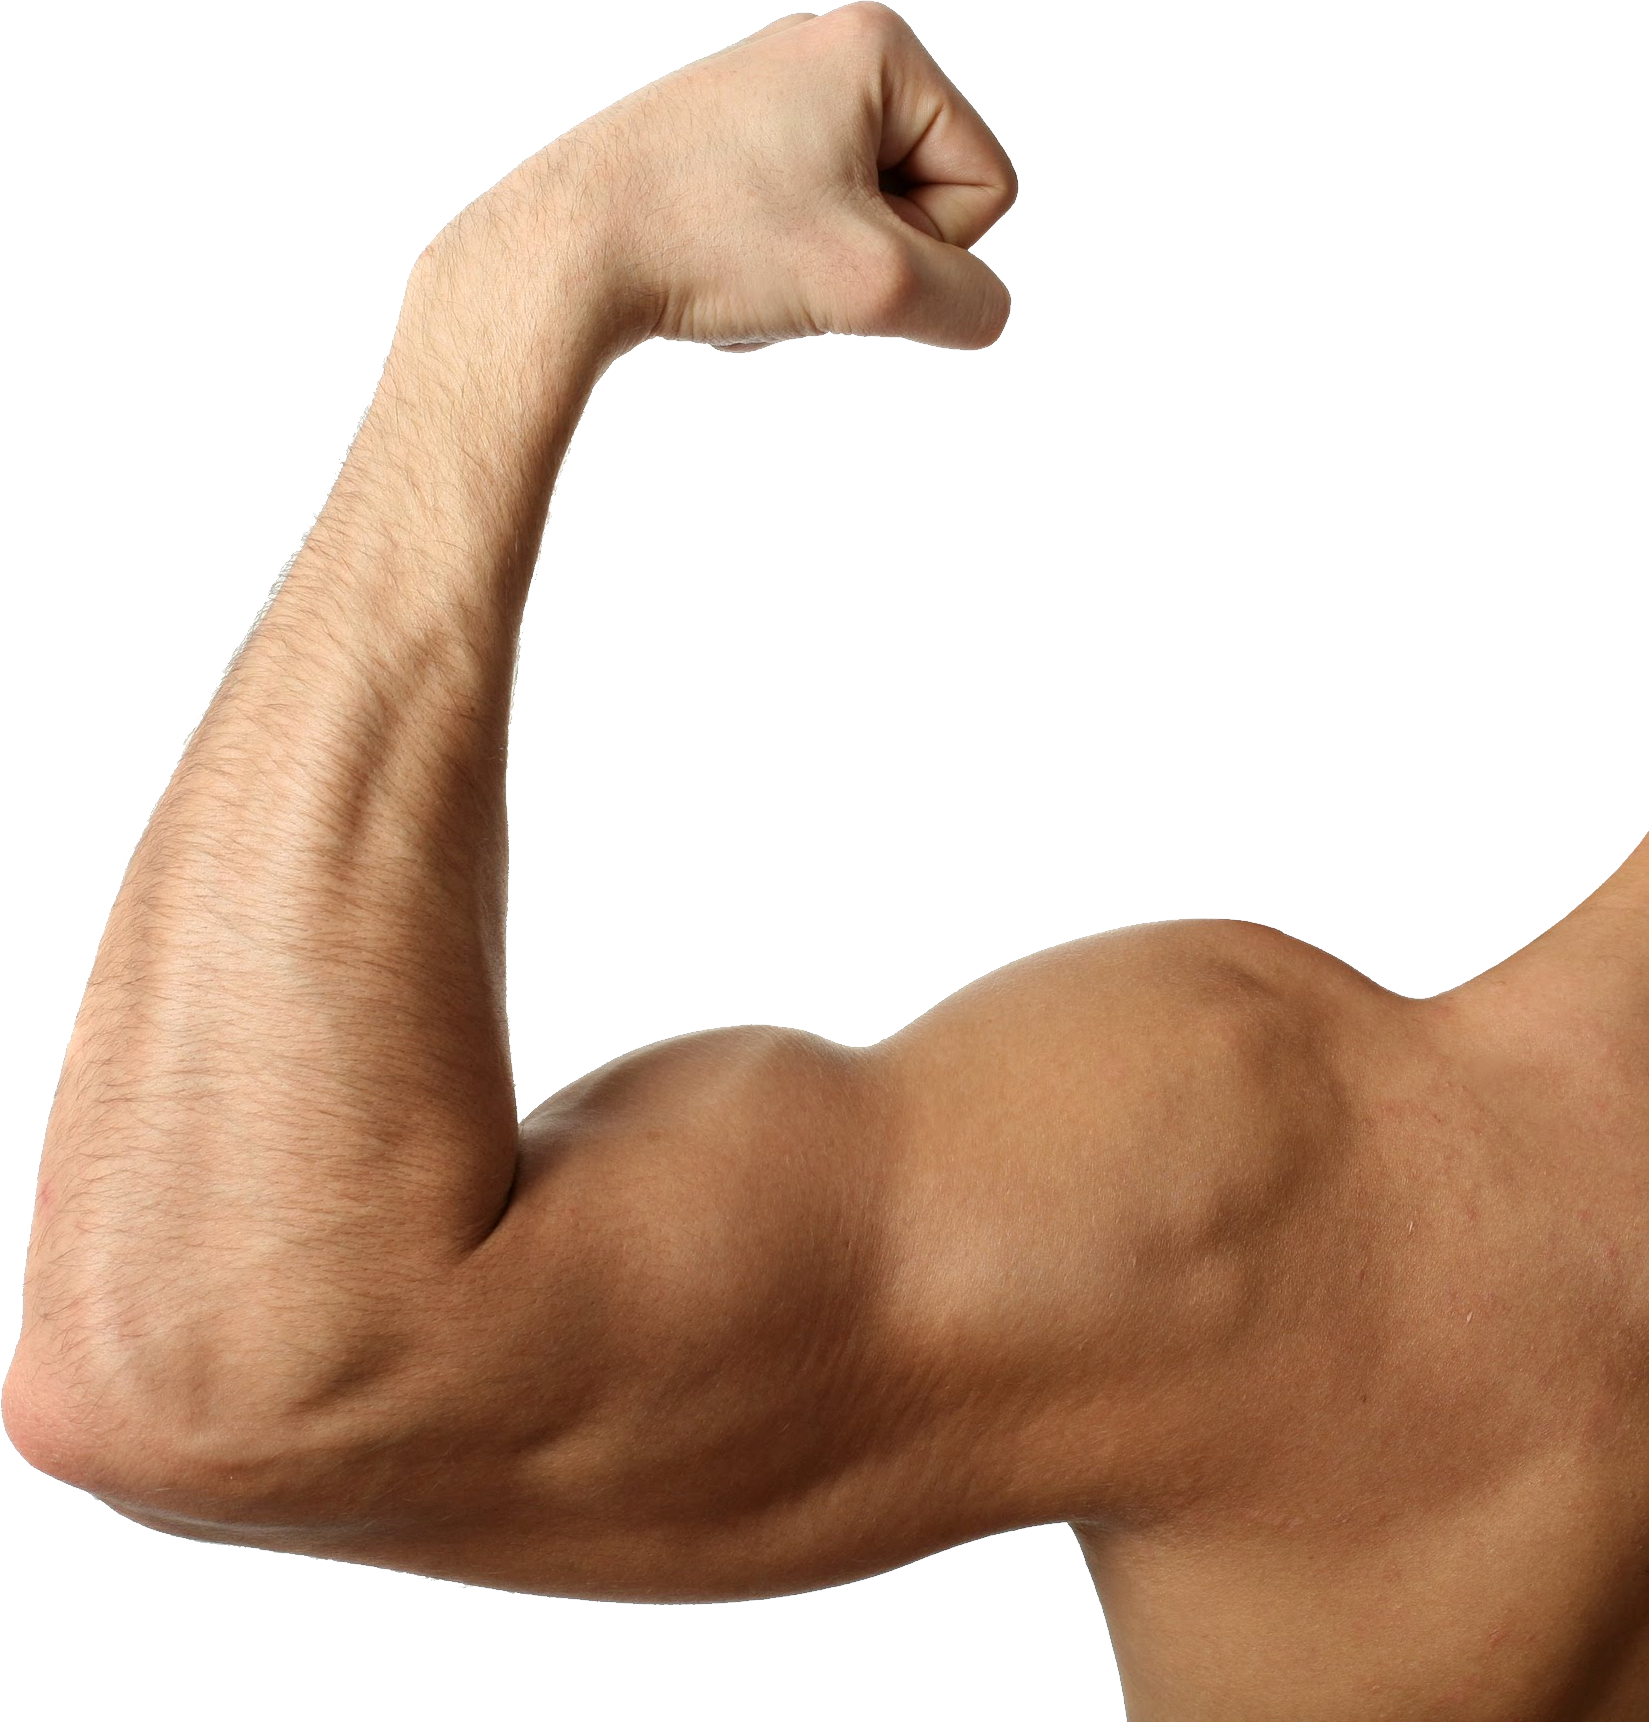 Free Muscle Arm Png, Download Free Muscle Arm Png png images, Free